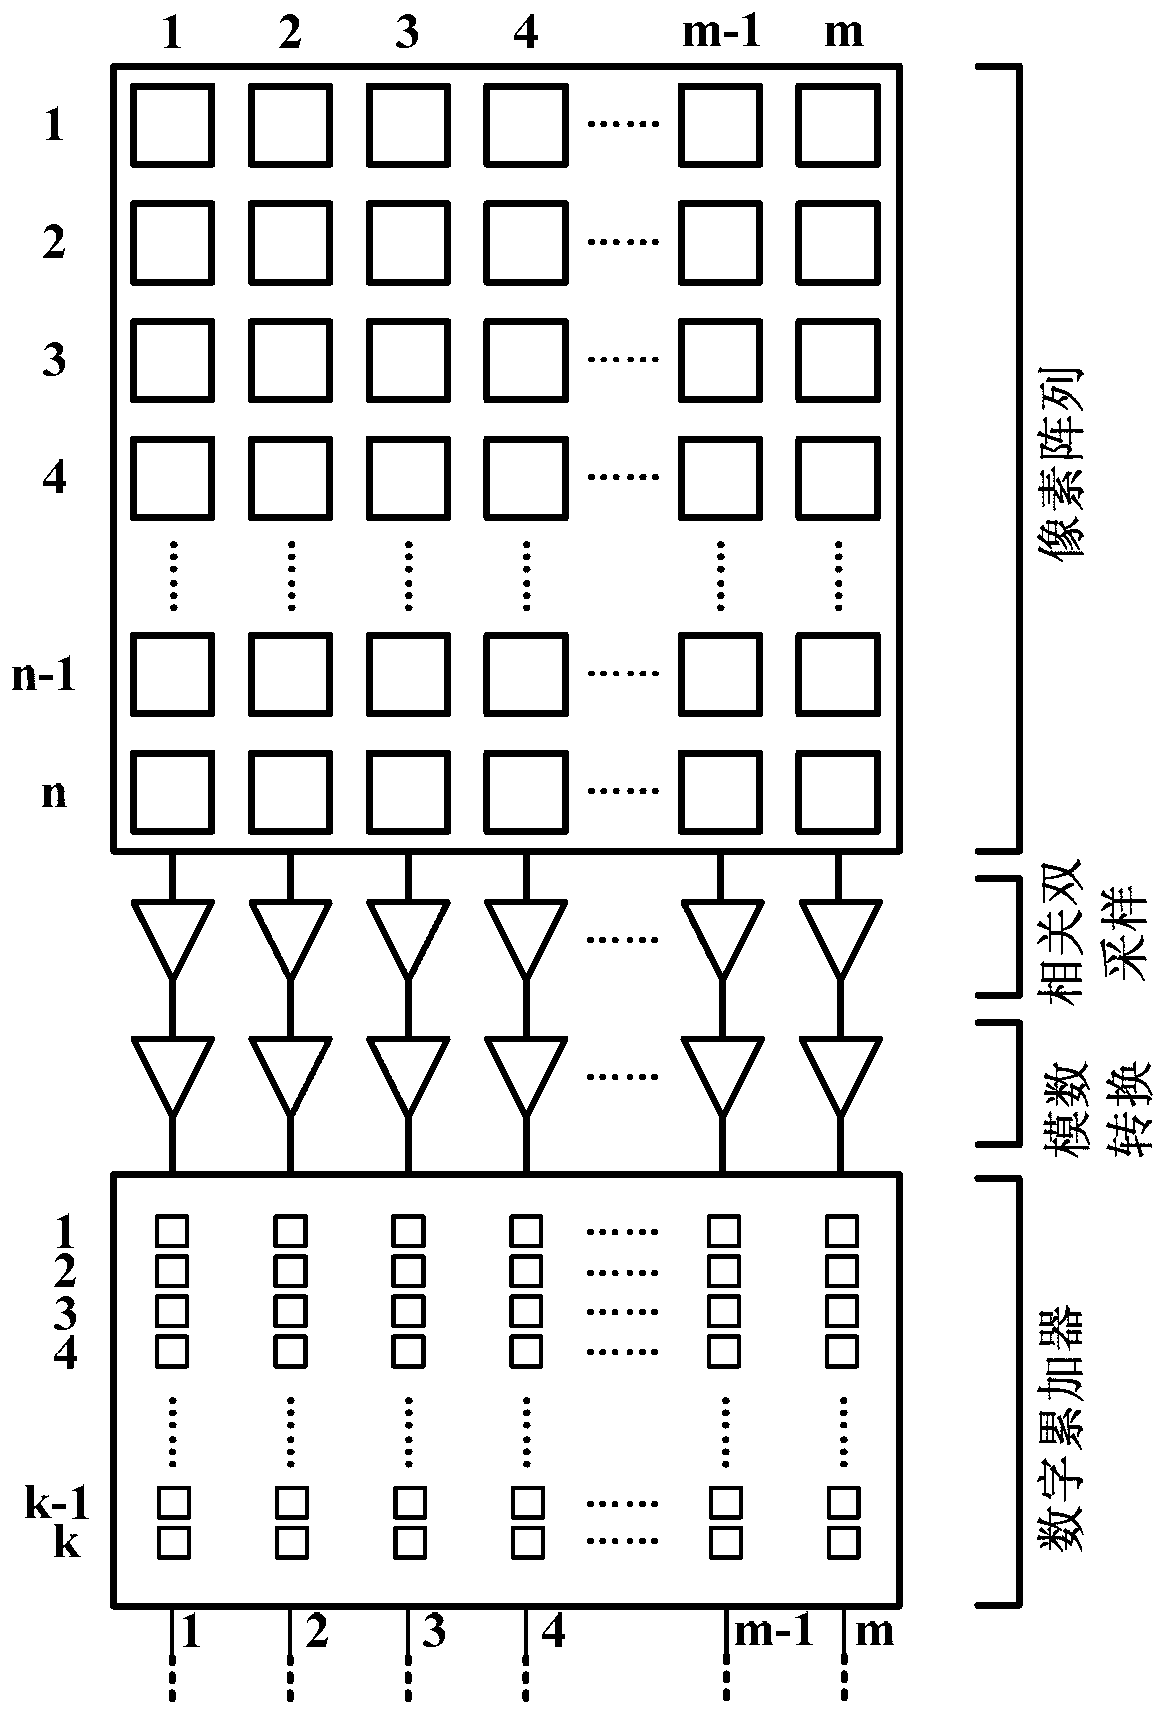 Low-power-consumption time delay integral type CMOS (Complementary Metal-Oxide-Semiconductor Transistor) image sensor